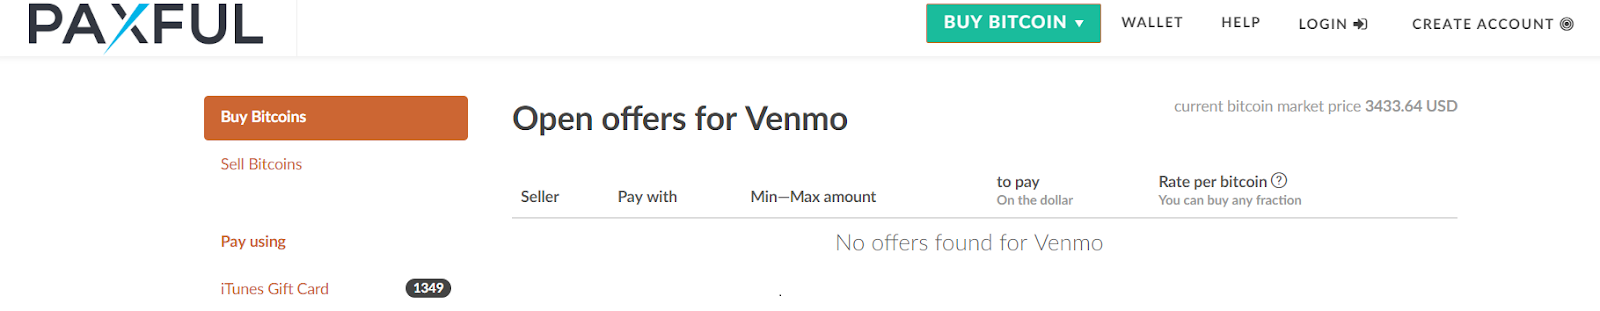 Paxful open offers for Venmo screen.